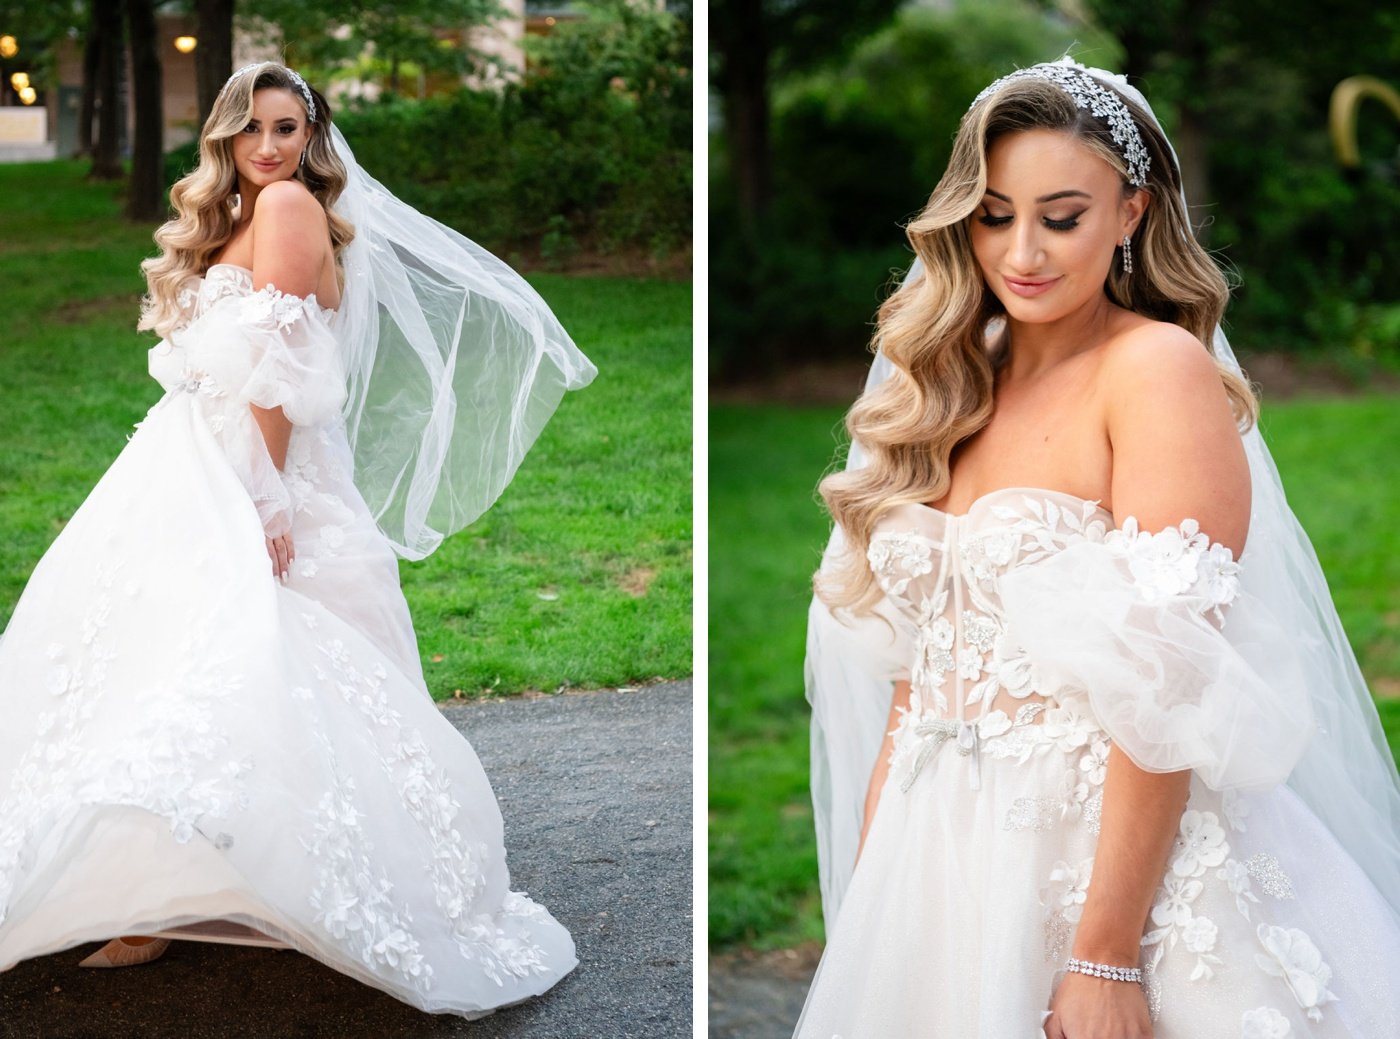 Bride wearing an off-the-shoulder wedding gown with corset boning and floral appliqués